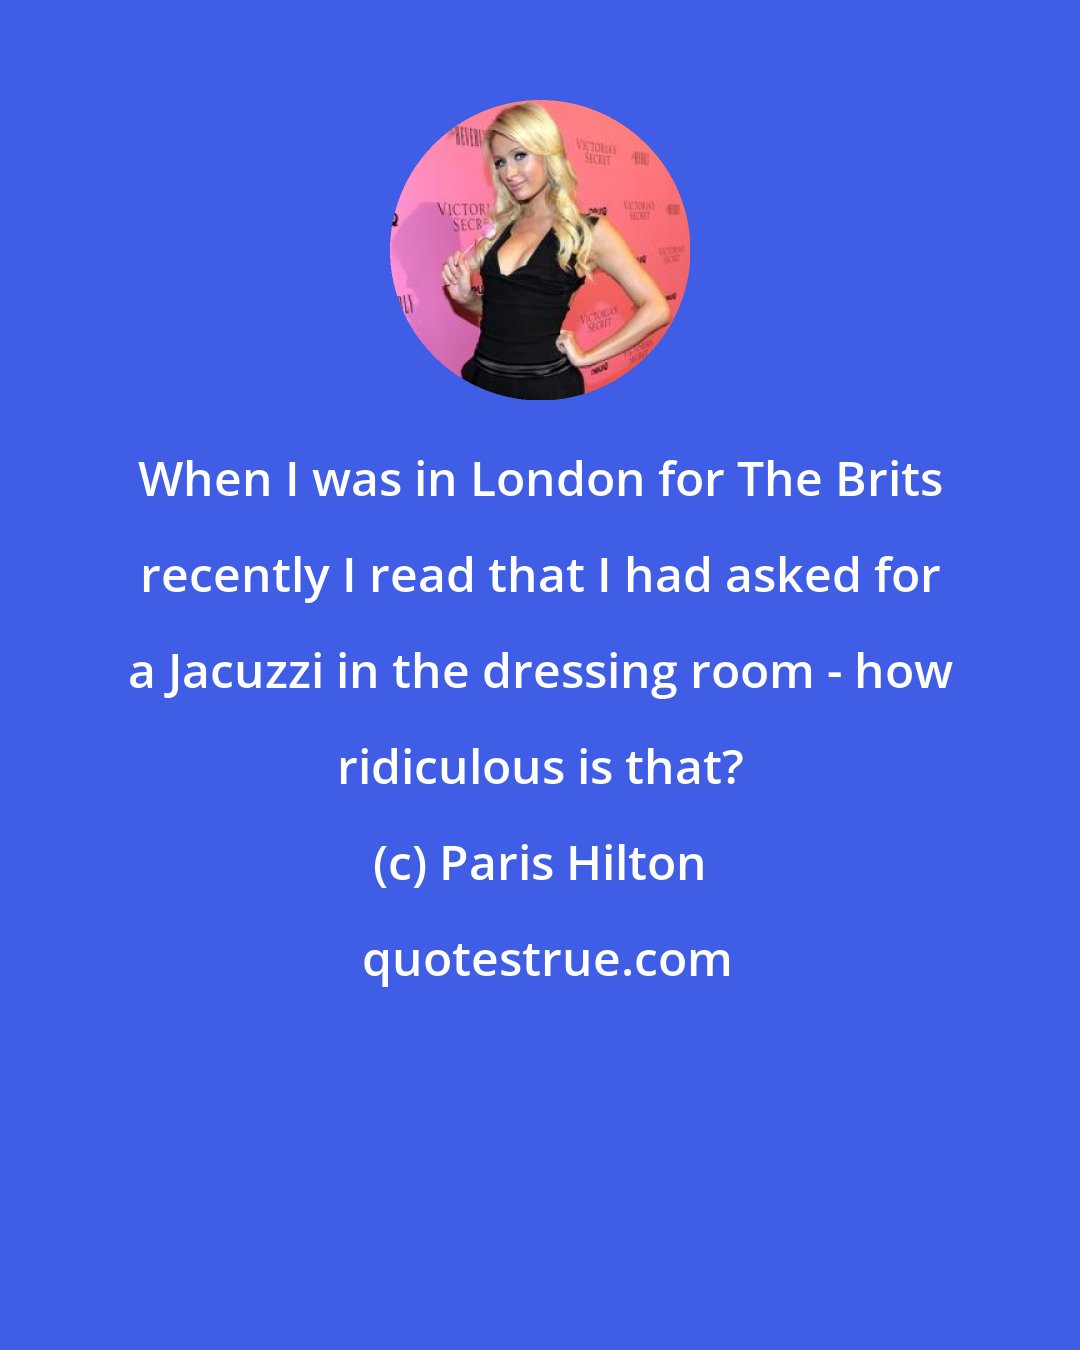 Paris Hilton: When I was in London for The Brits recently I read that I had asked for a Jacuzzi in the dressing room - how ridiculous is that?